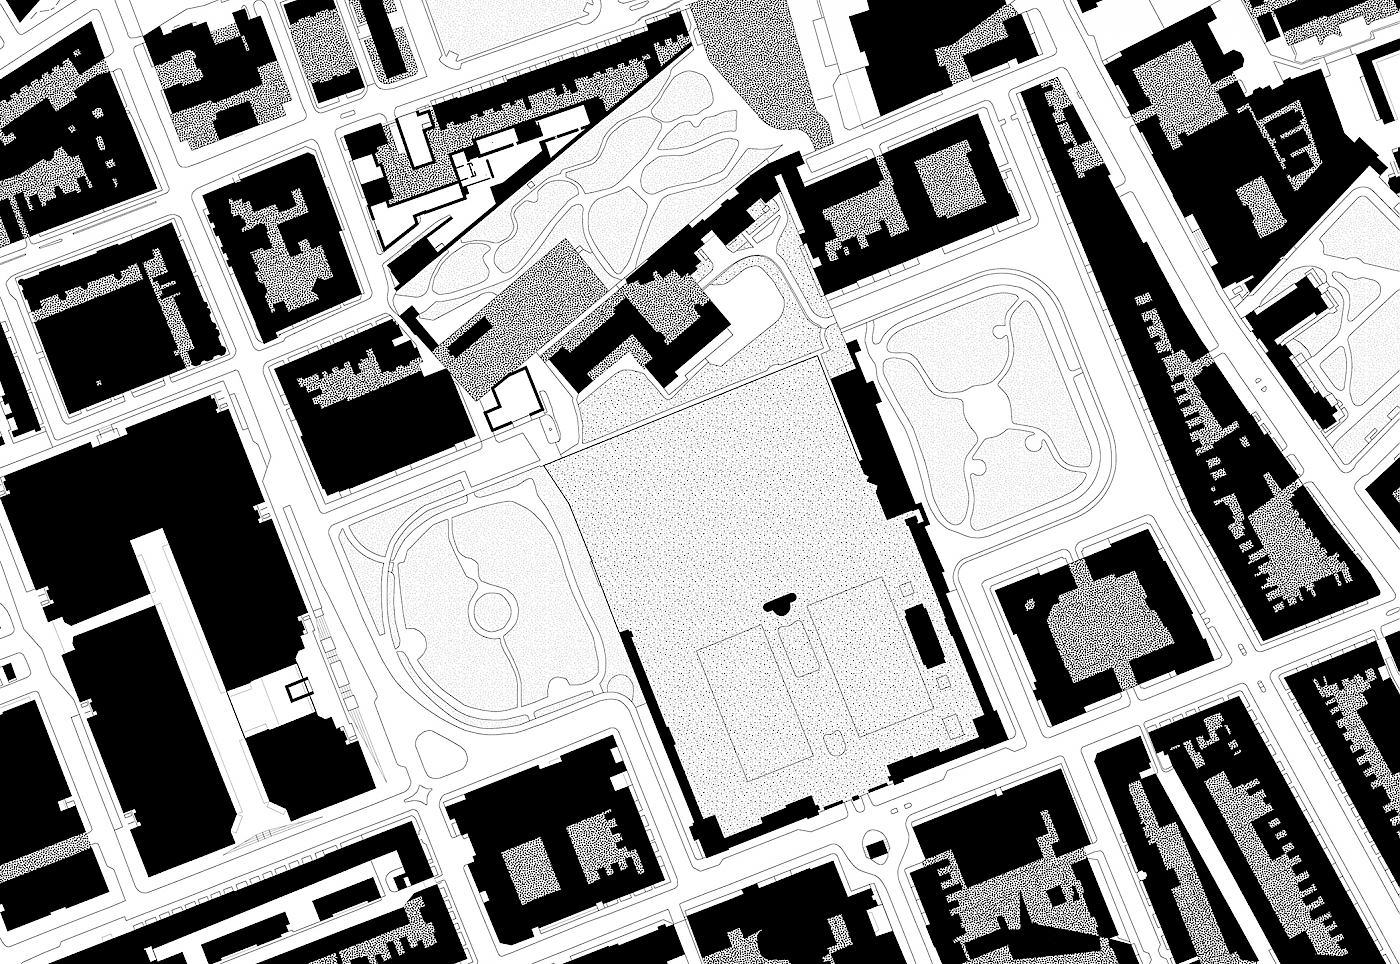 Streets, Squares, Religious, Cultural Space in white, Grass in lightest grey, Coram's Fields in grey, Private Gardens in darkest Grey, Private and Commercial in Black